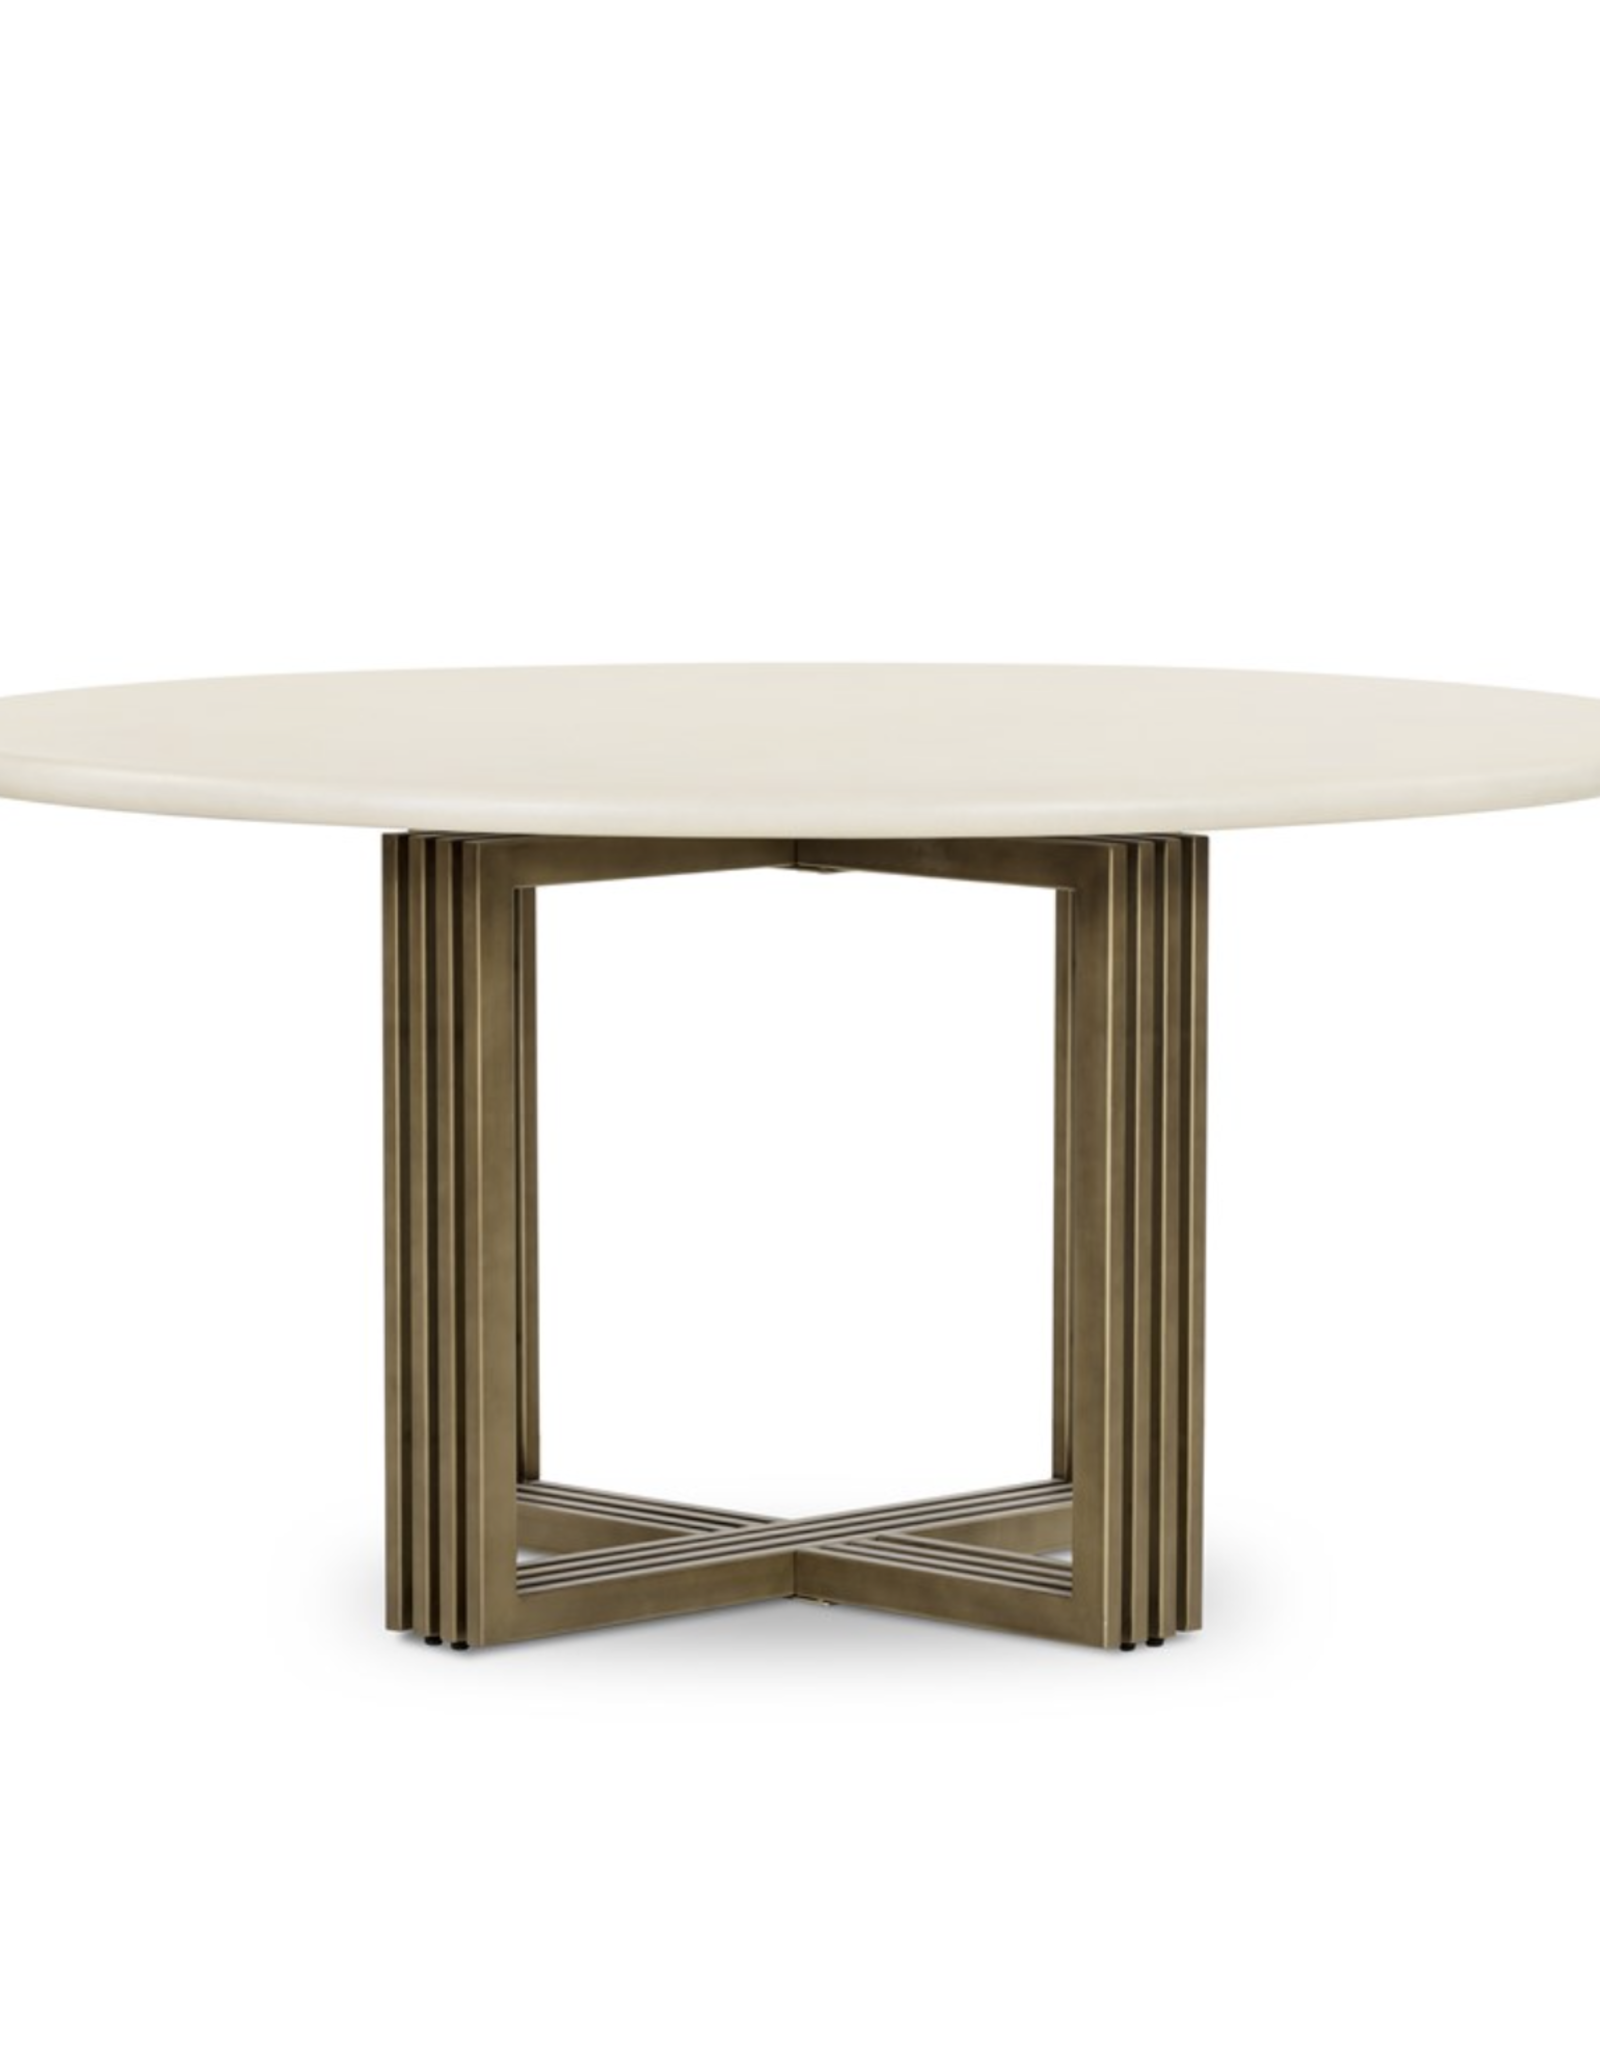 Mia Round Dining Table - Antique Brass/Parchment White